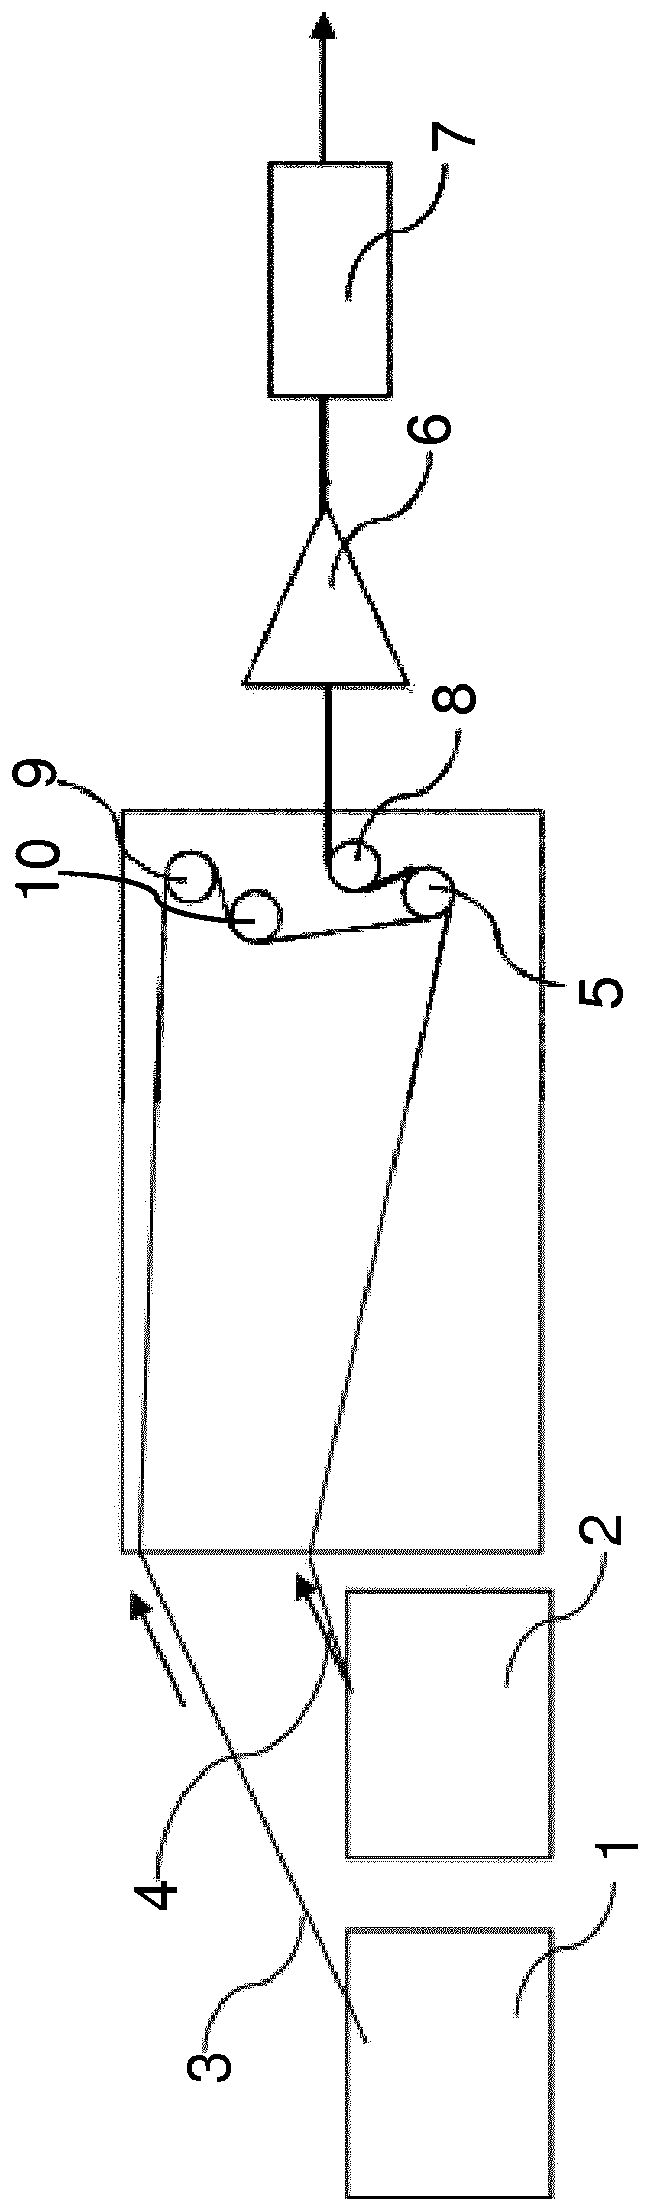 Apparatus and method for forming filter rods